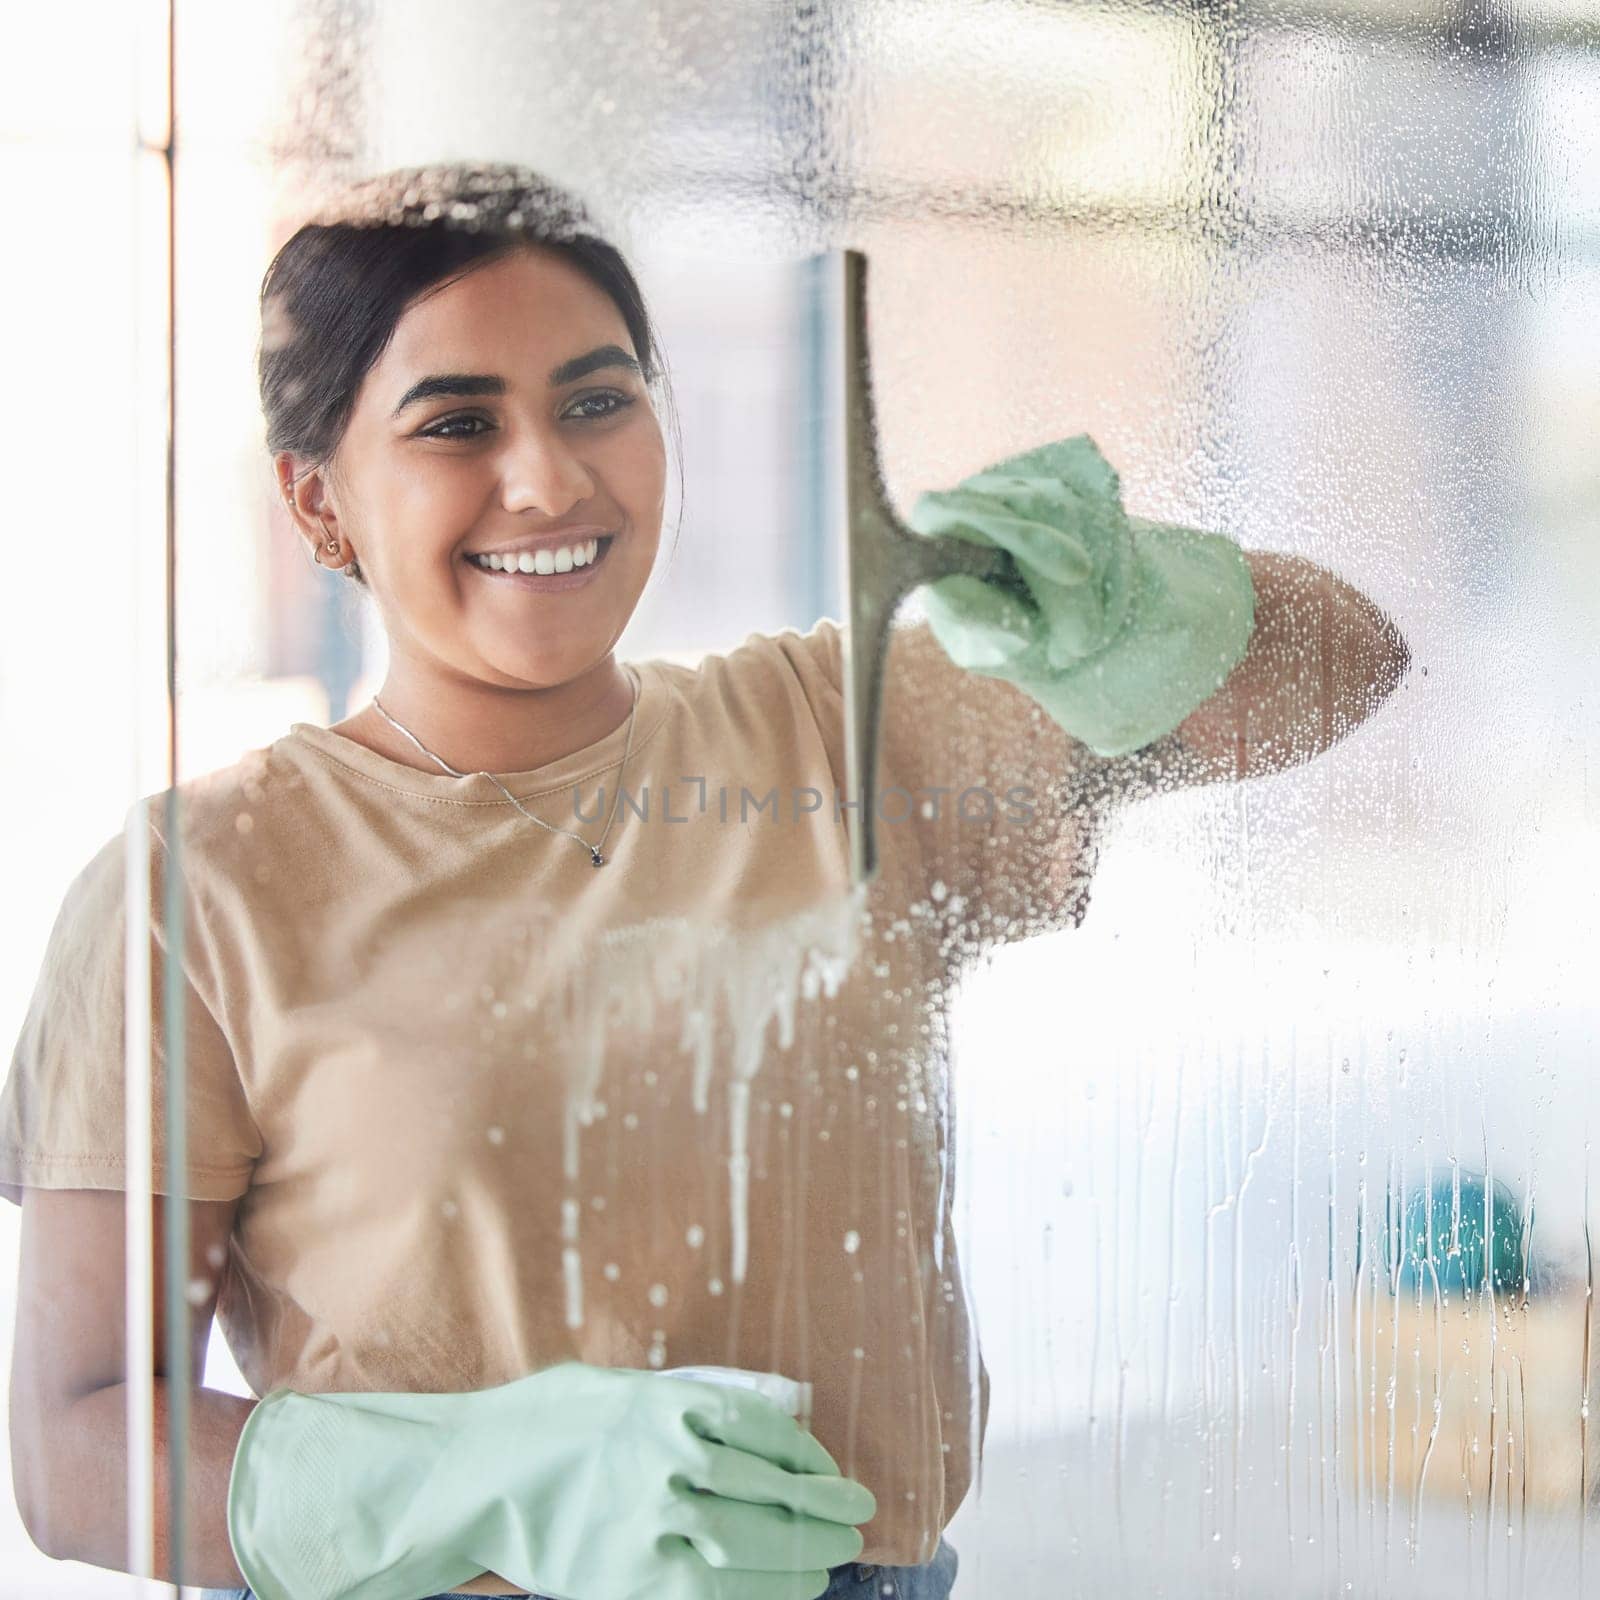 Happy, smile and girl cleaning window with spray bottle and soap or detergent, housekeeper in home or hotel. Housework, smudge and woman or professional cleaner service washing off glass in apartment by YuriArcurs